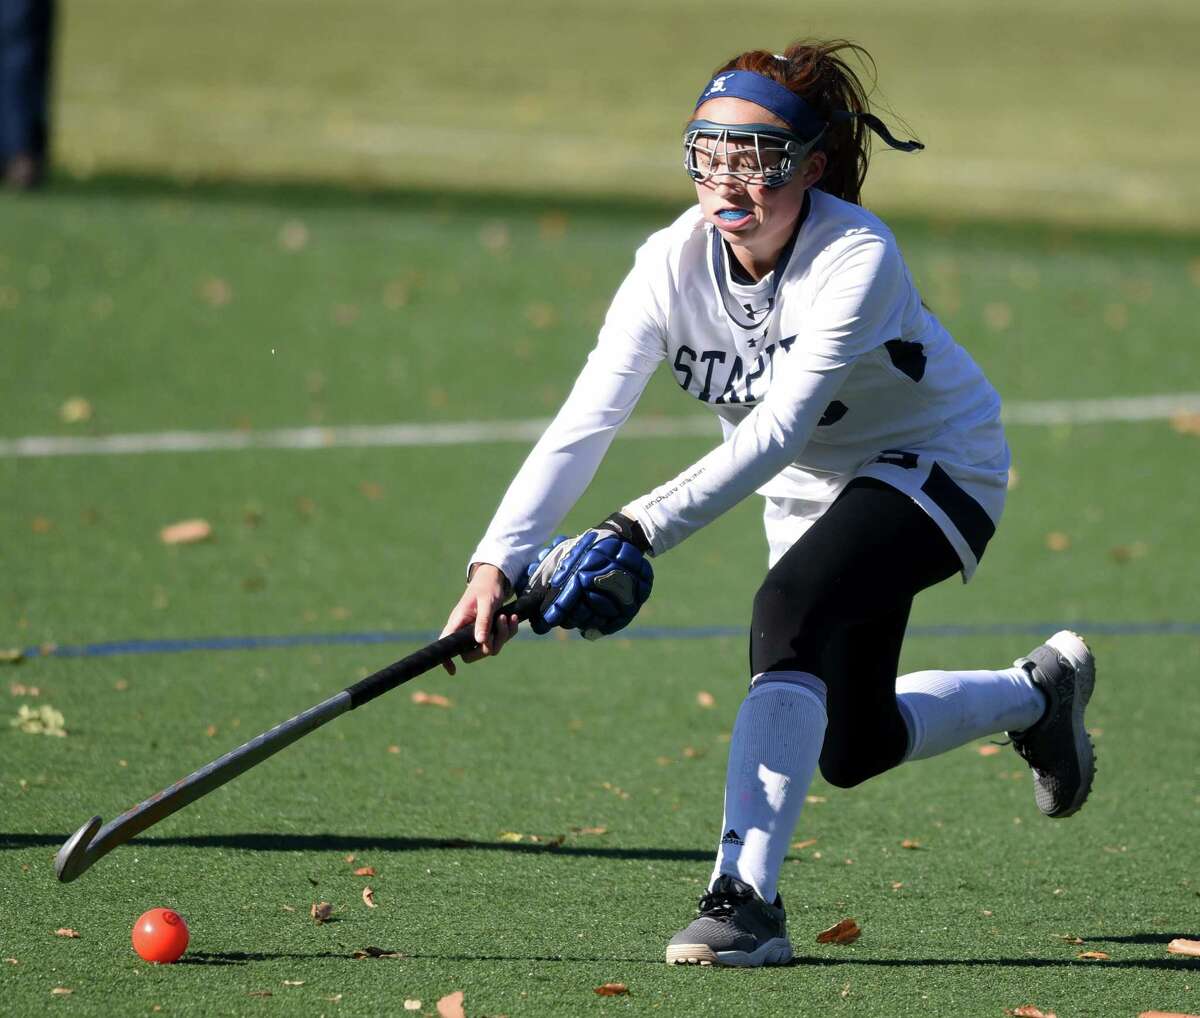 Staples' Laine Ambrose (10) corrals the ball during the Wreckers' game against New Canaan in the CIAC Class L field hockey quarterfinals in Westport on Saturday, Nov. 16, 2019.